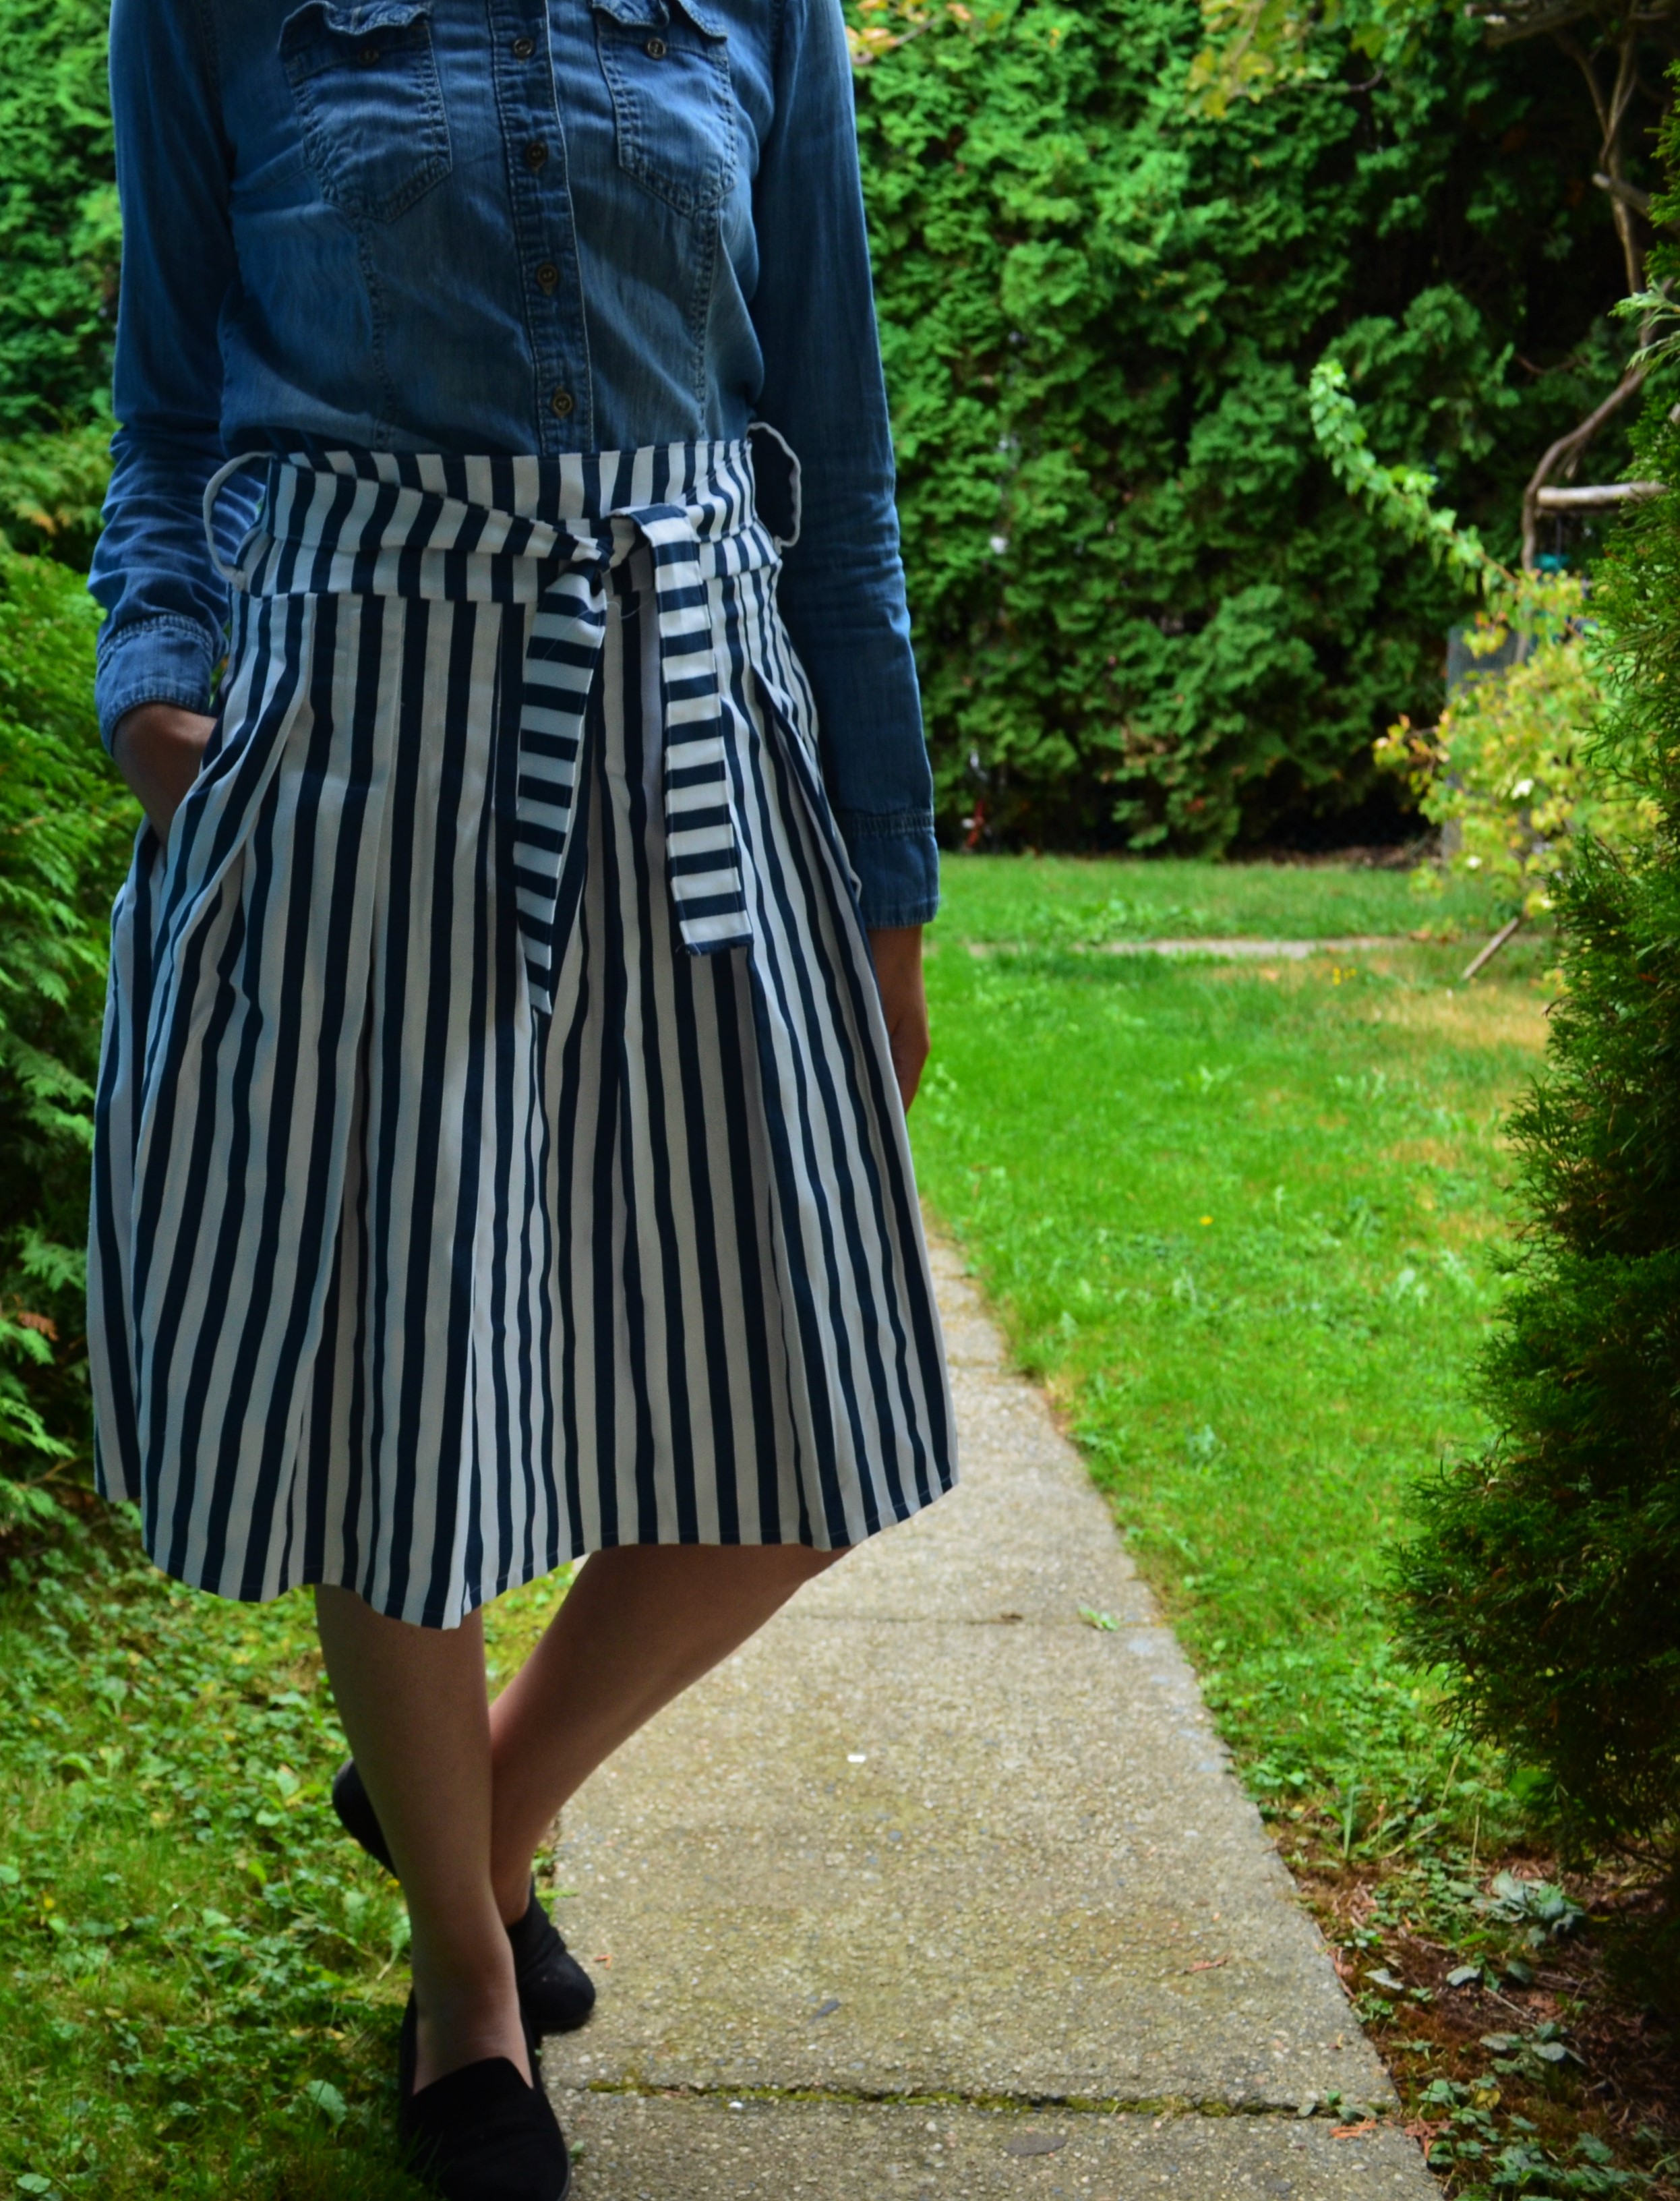 FREE SEWING PATTERN: The Pleated skirt pattern